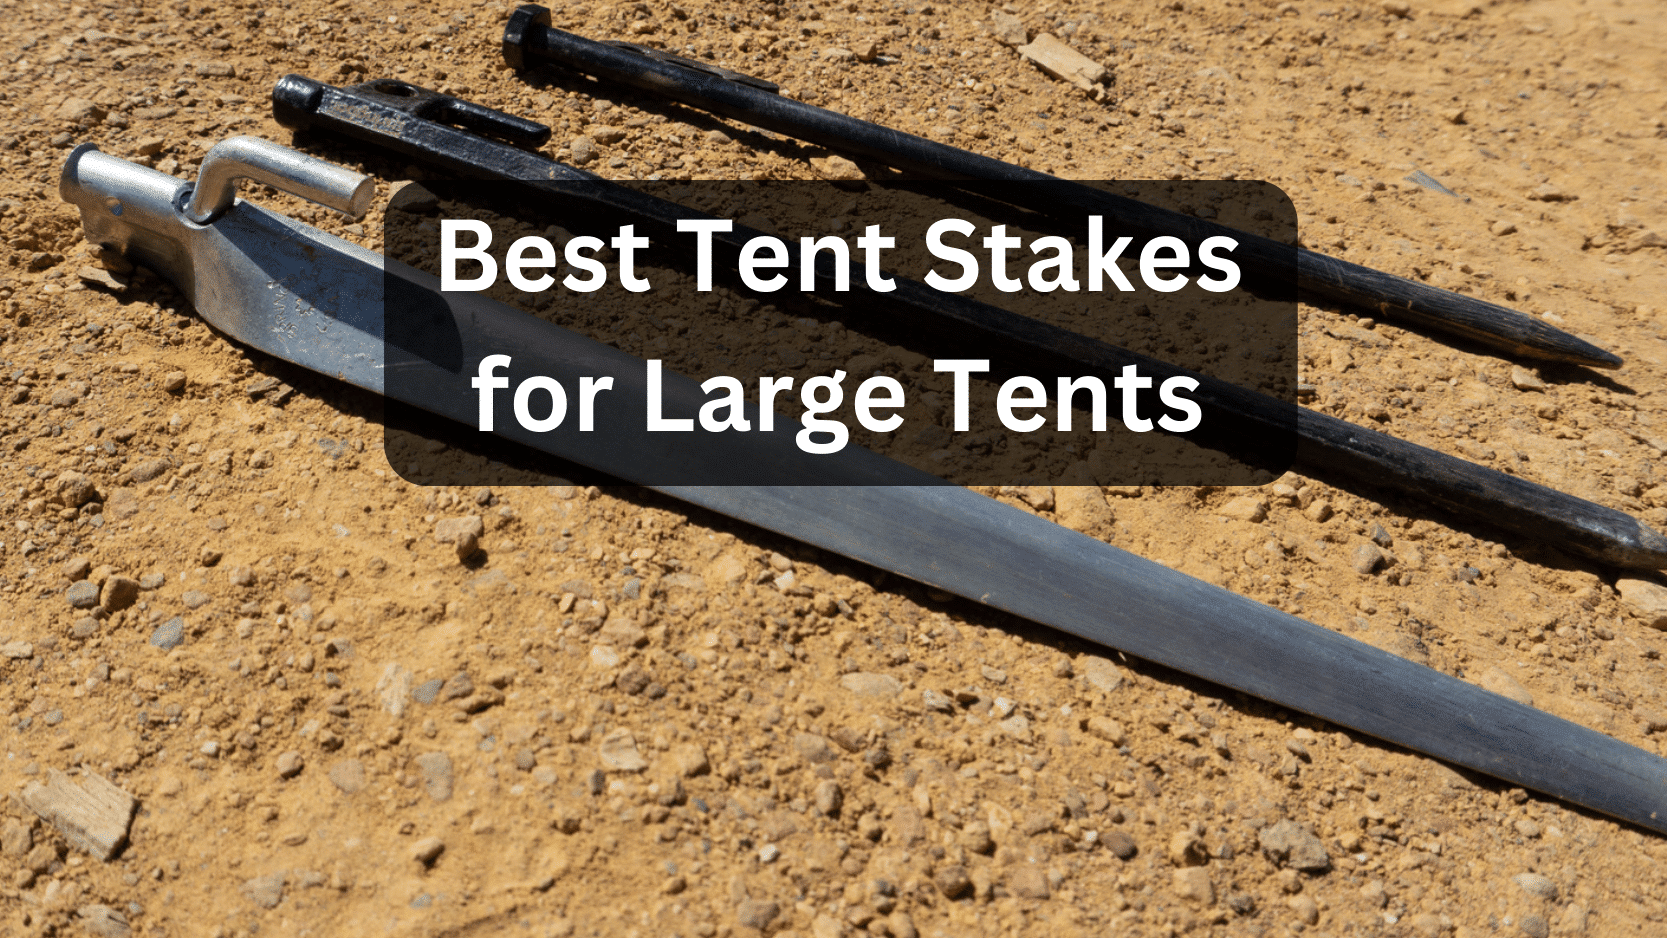 Best Heavy-Duty Tent Stakes for Large Tents (and 2 to Avoid)